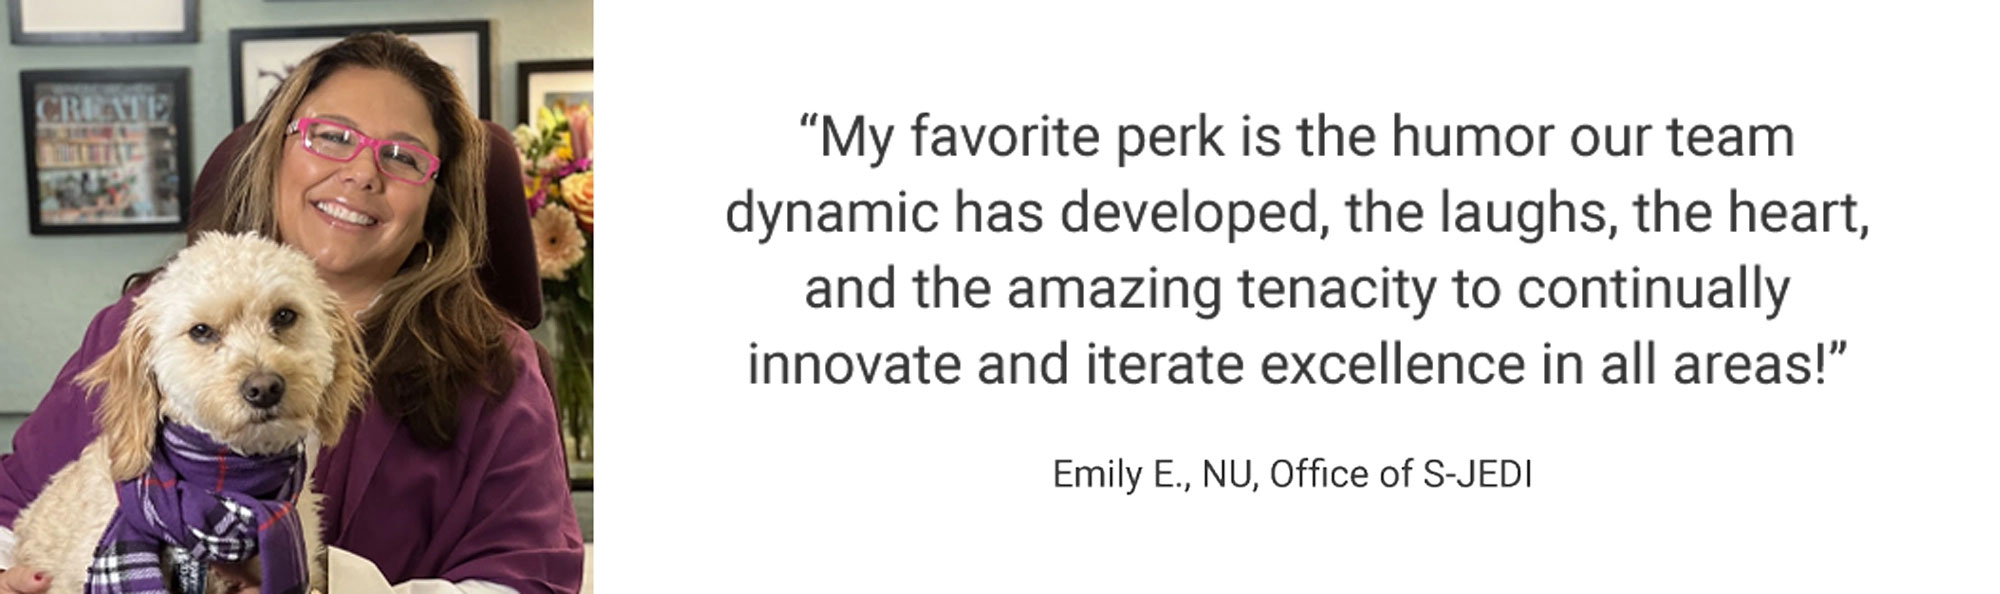 Employee Testimonial, "My favorite perk is the humor our team dynamic has developed, the laughs, the heart, and the amazing tenacity to continually innovate and iterate excellence in all areas!" by Emily E., NUS, Office of S-JEDI